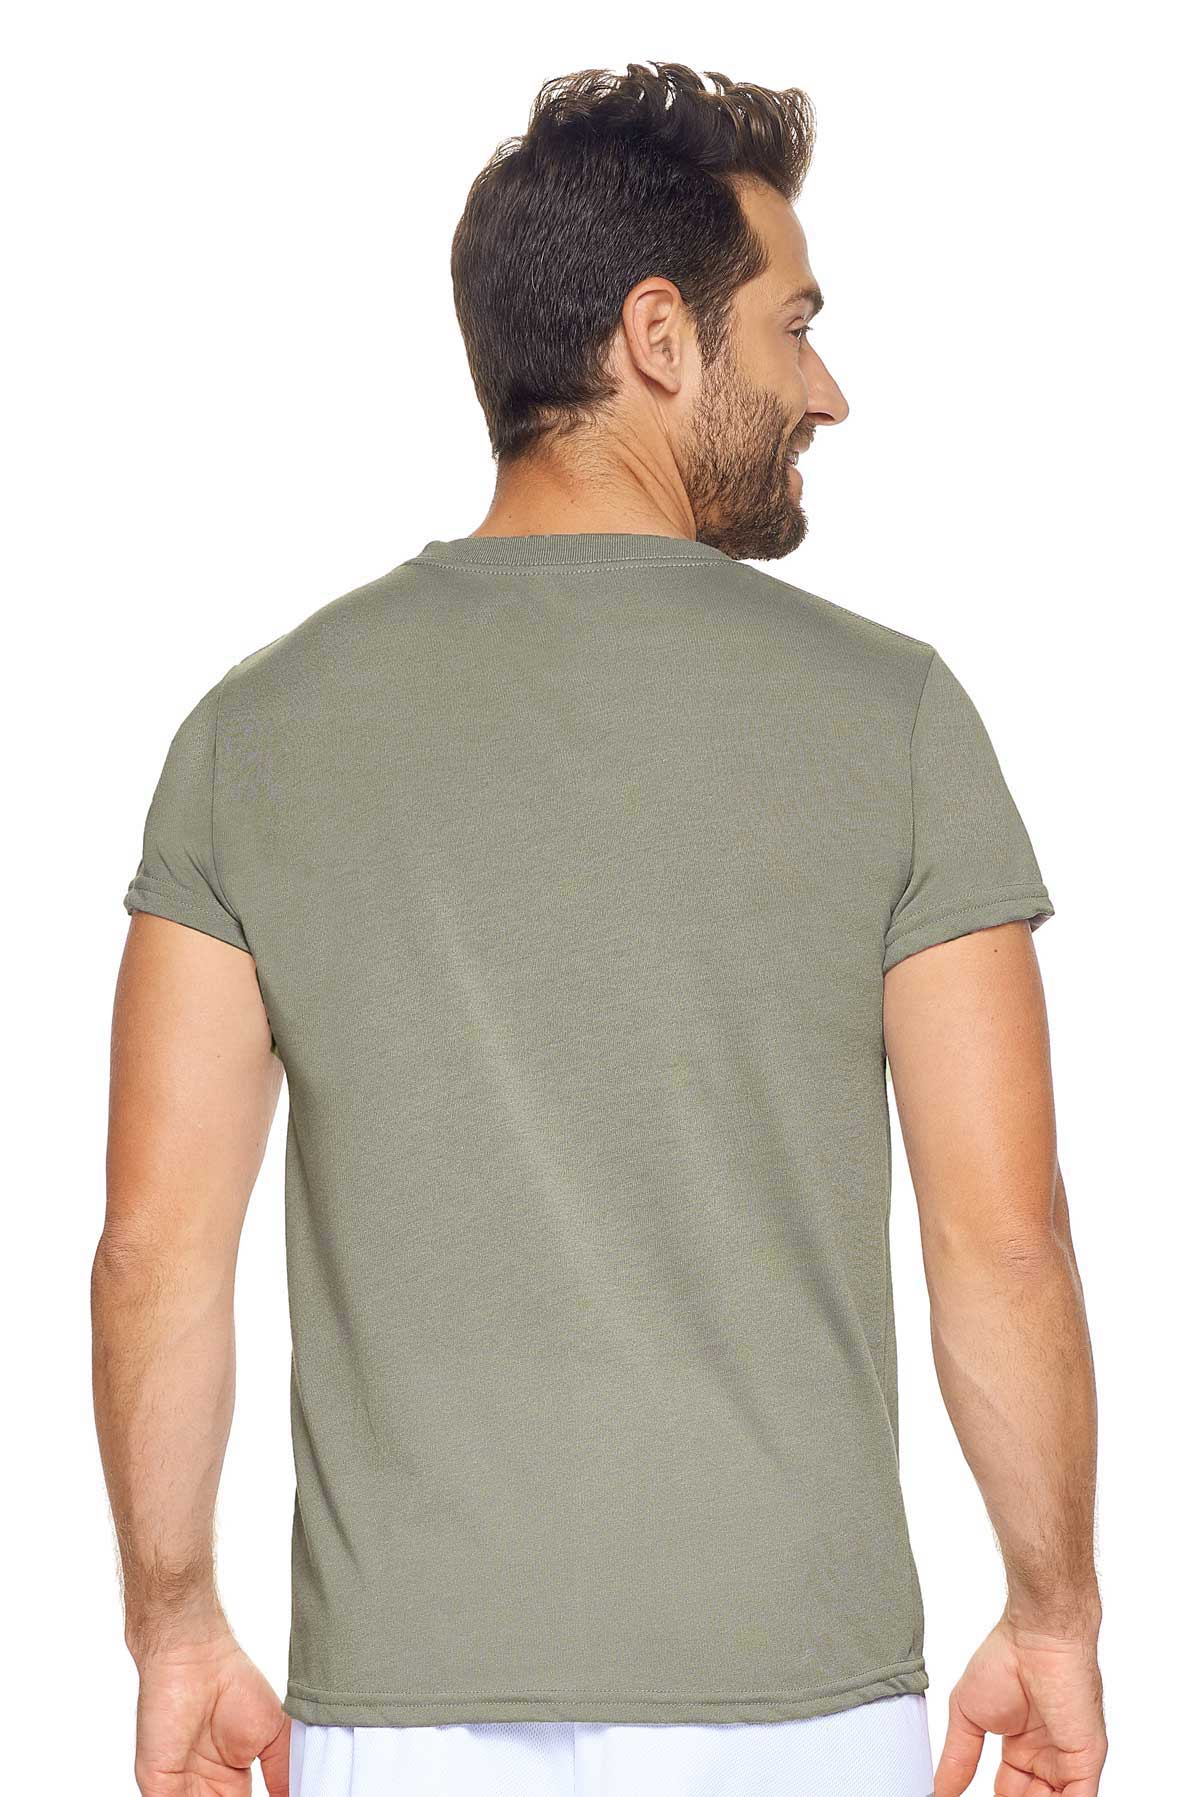 Expert Brand Apparel Made in USA Outdoor Durable In The Field Shirt PT808 Army Gray image 2#color_army-gray